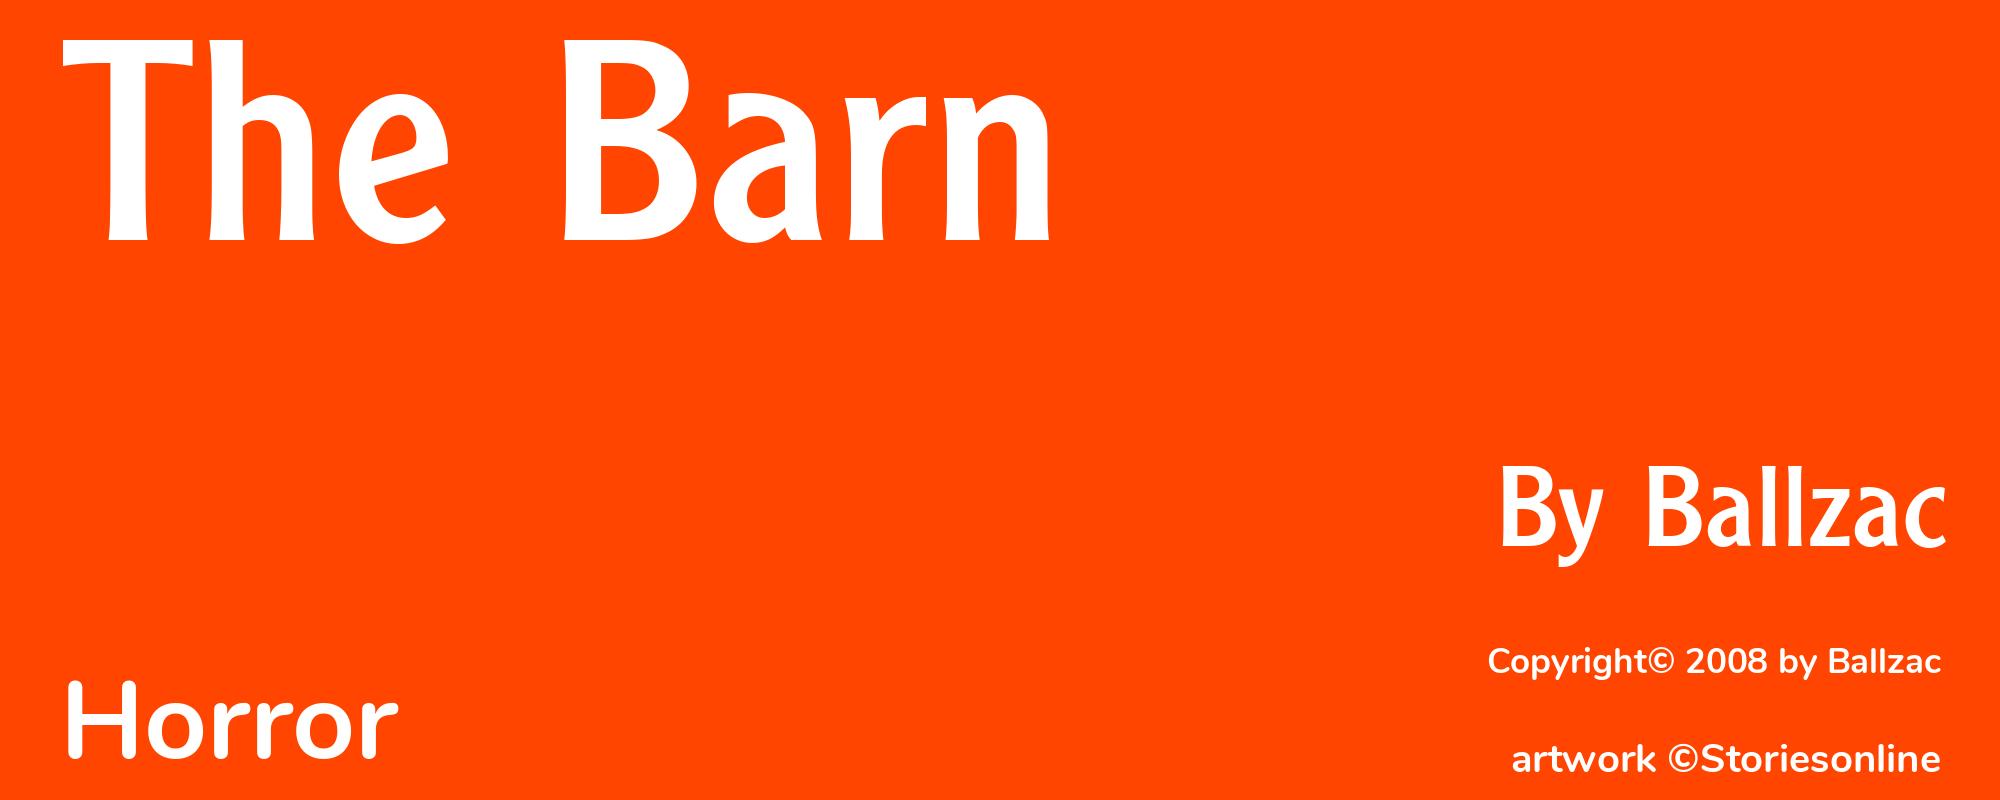 The Barn - Cover